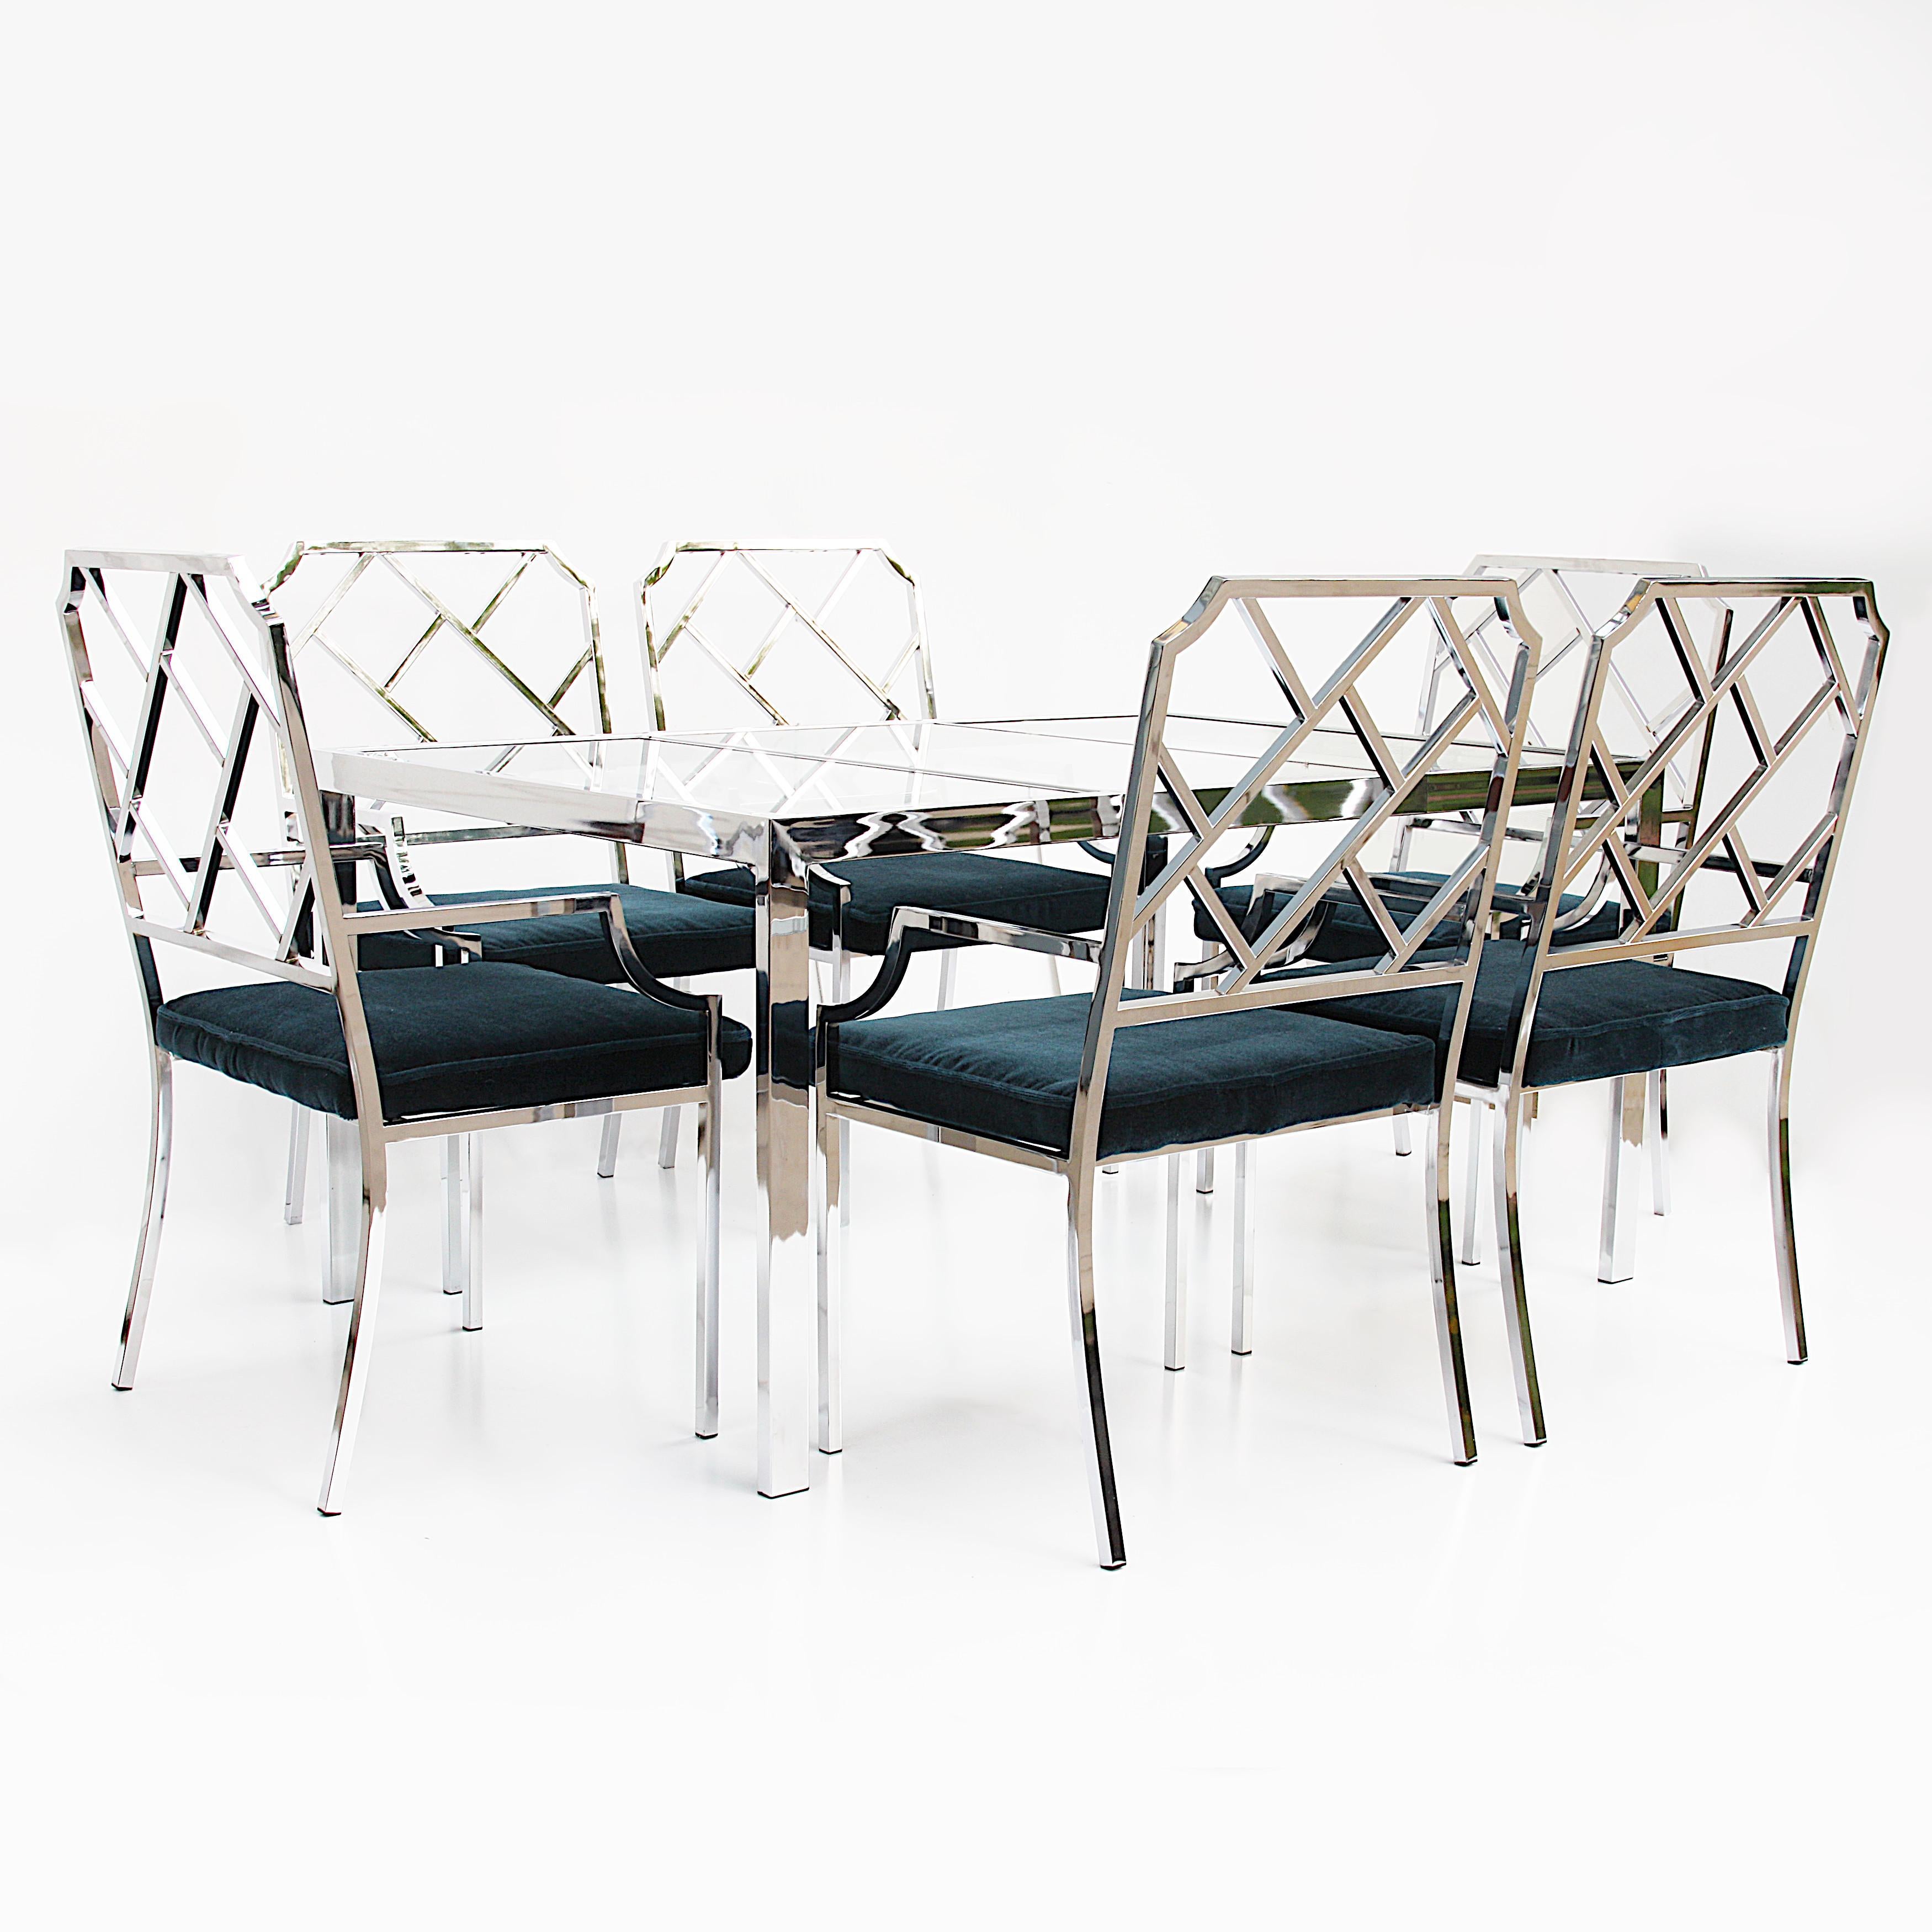 Wonderful set of 6 Chinese Chippendale chairs and matching table by Design Institute of America (DIA). Set features six matching chrome armchairs with a modern, Asian motif and a matching minimalist chrome table that allows the chairs to take center